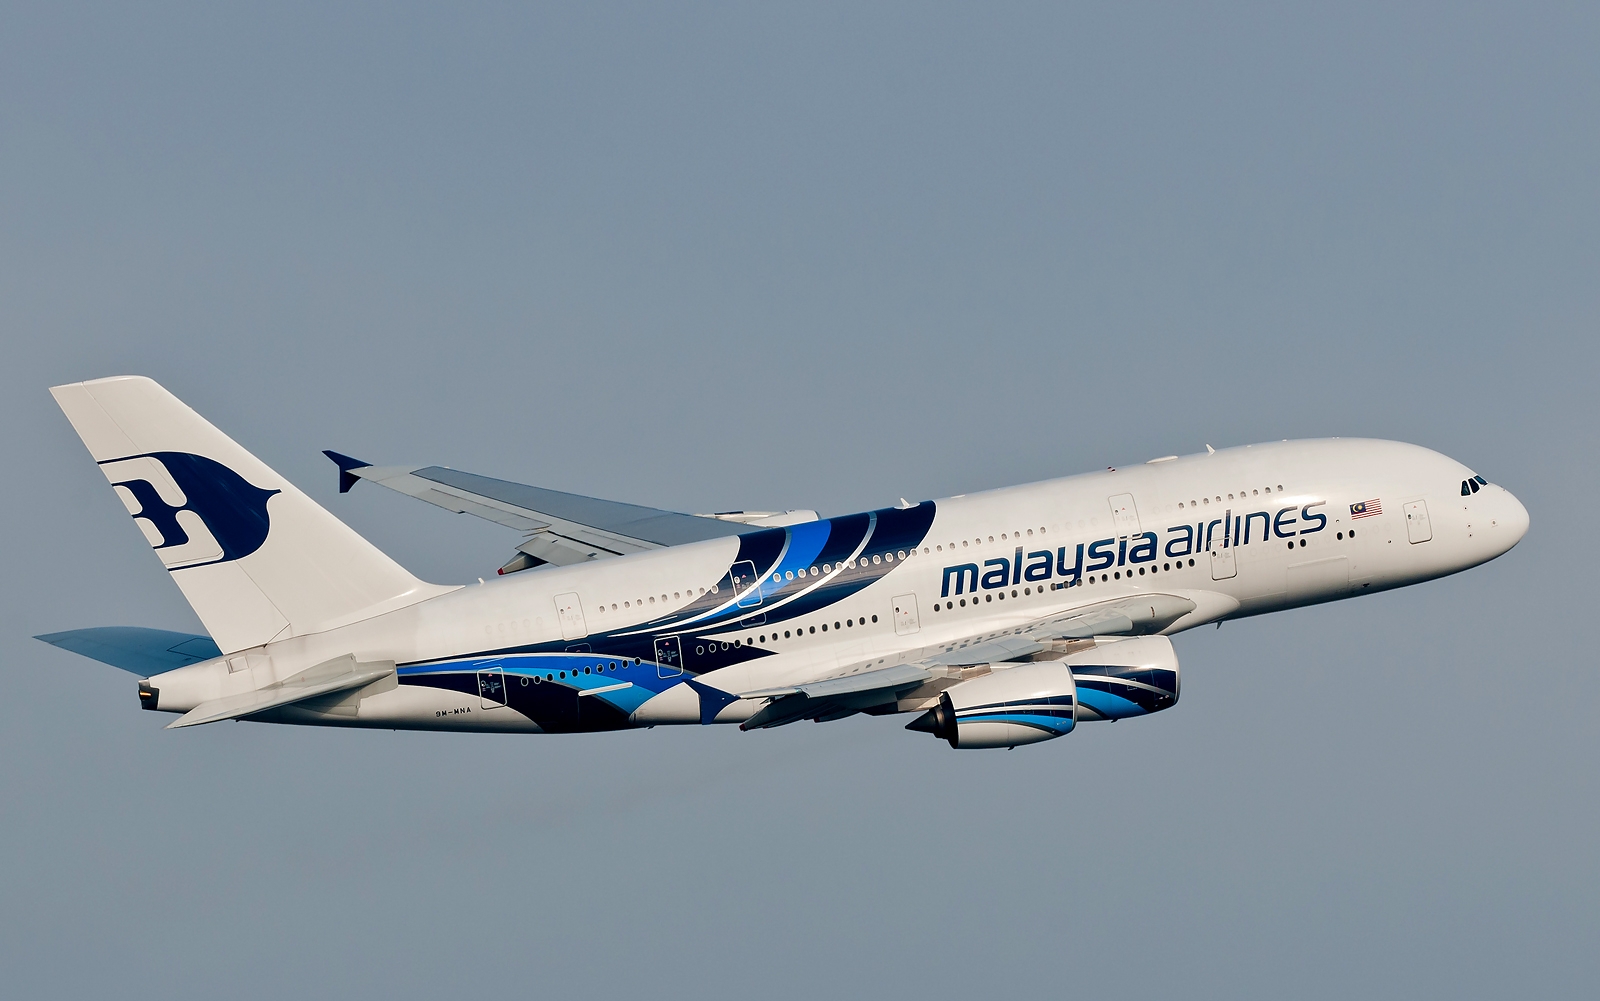 Airbus A380 Malaysia Airlines, A380 Malaysia Airlines, - Malaysia Airlines - HD Wallpaper 